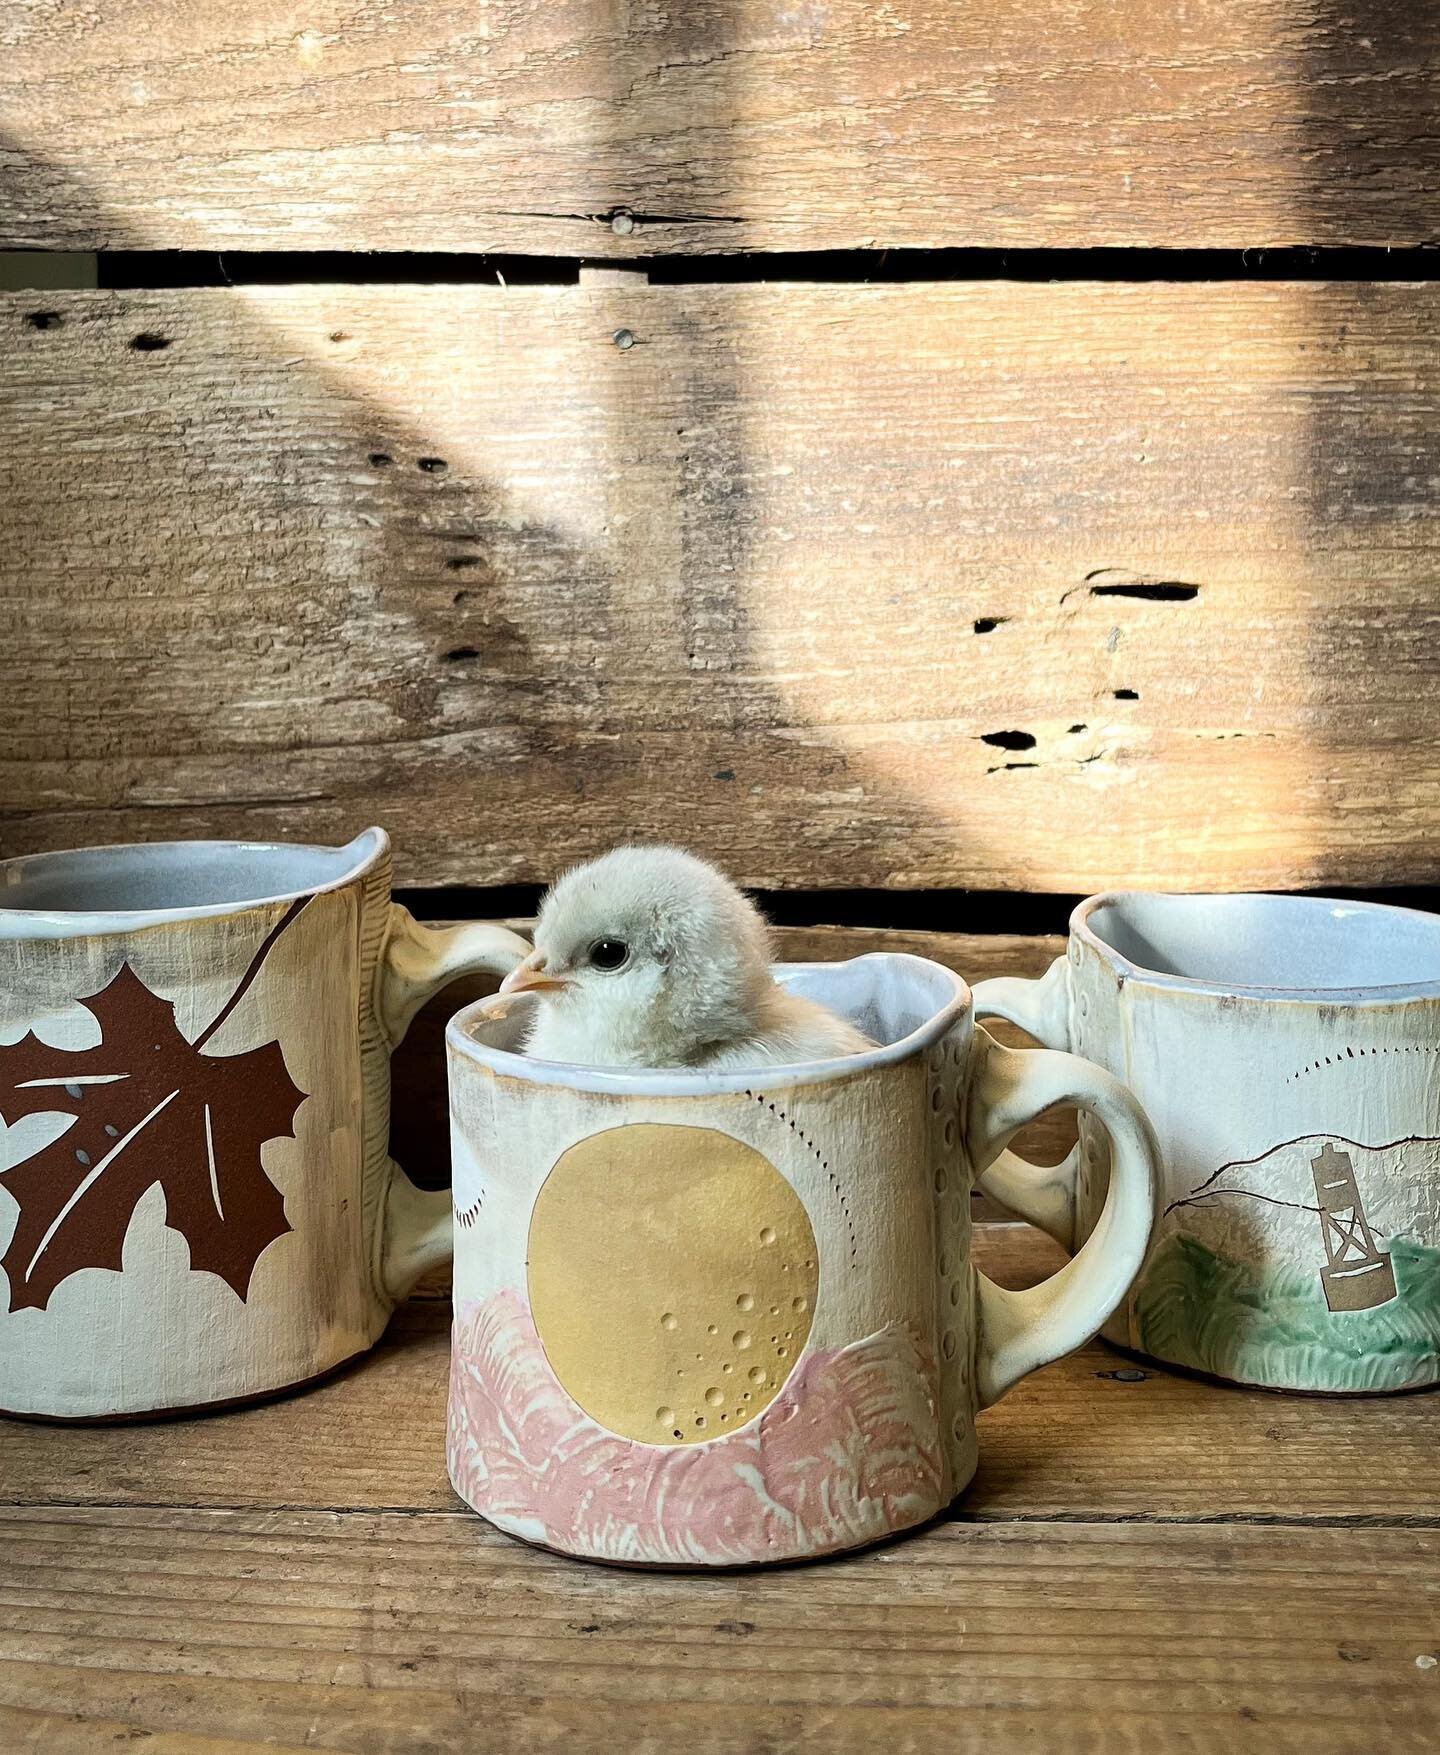 We all knew that these pics were coming right? 
Little floof posing in some new mug designs fresh out of the kiln (but cooled obvs😳)
.
.
.
#drydockgoods #drydockpottery #slabbuiltceramics #slabbuilding #slabbuiltpottery #ceramics #handbuiltceramics 